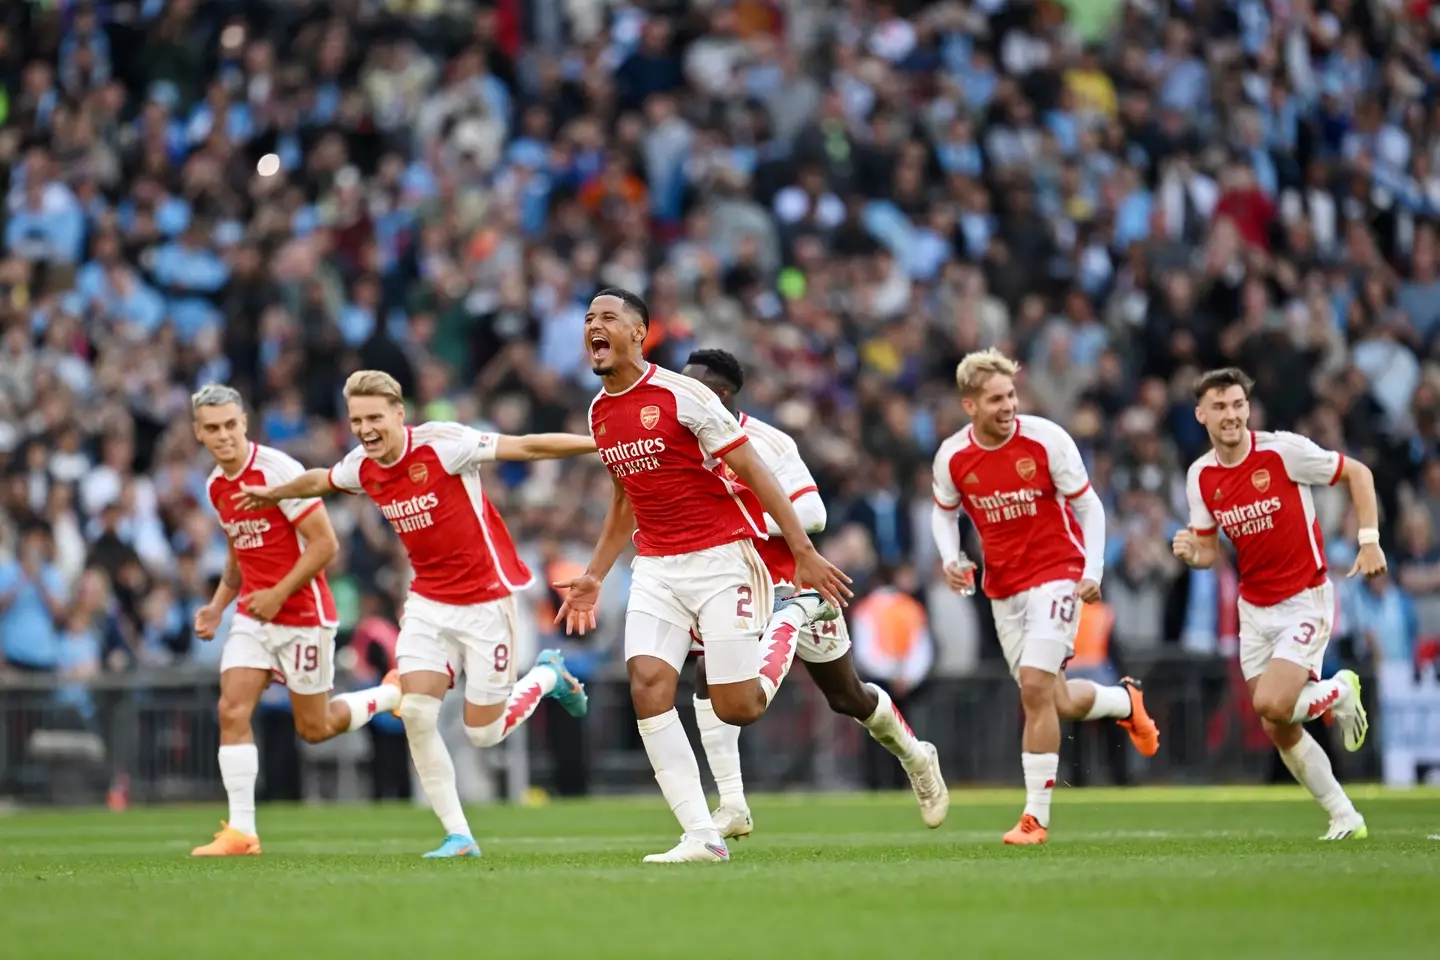 Arsenal have won the Community Shield on penalties.